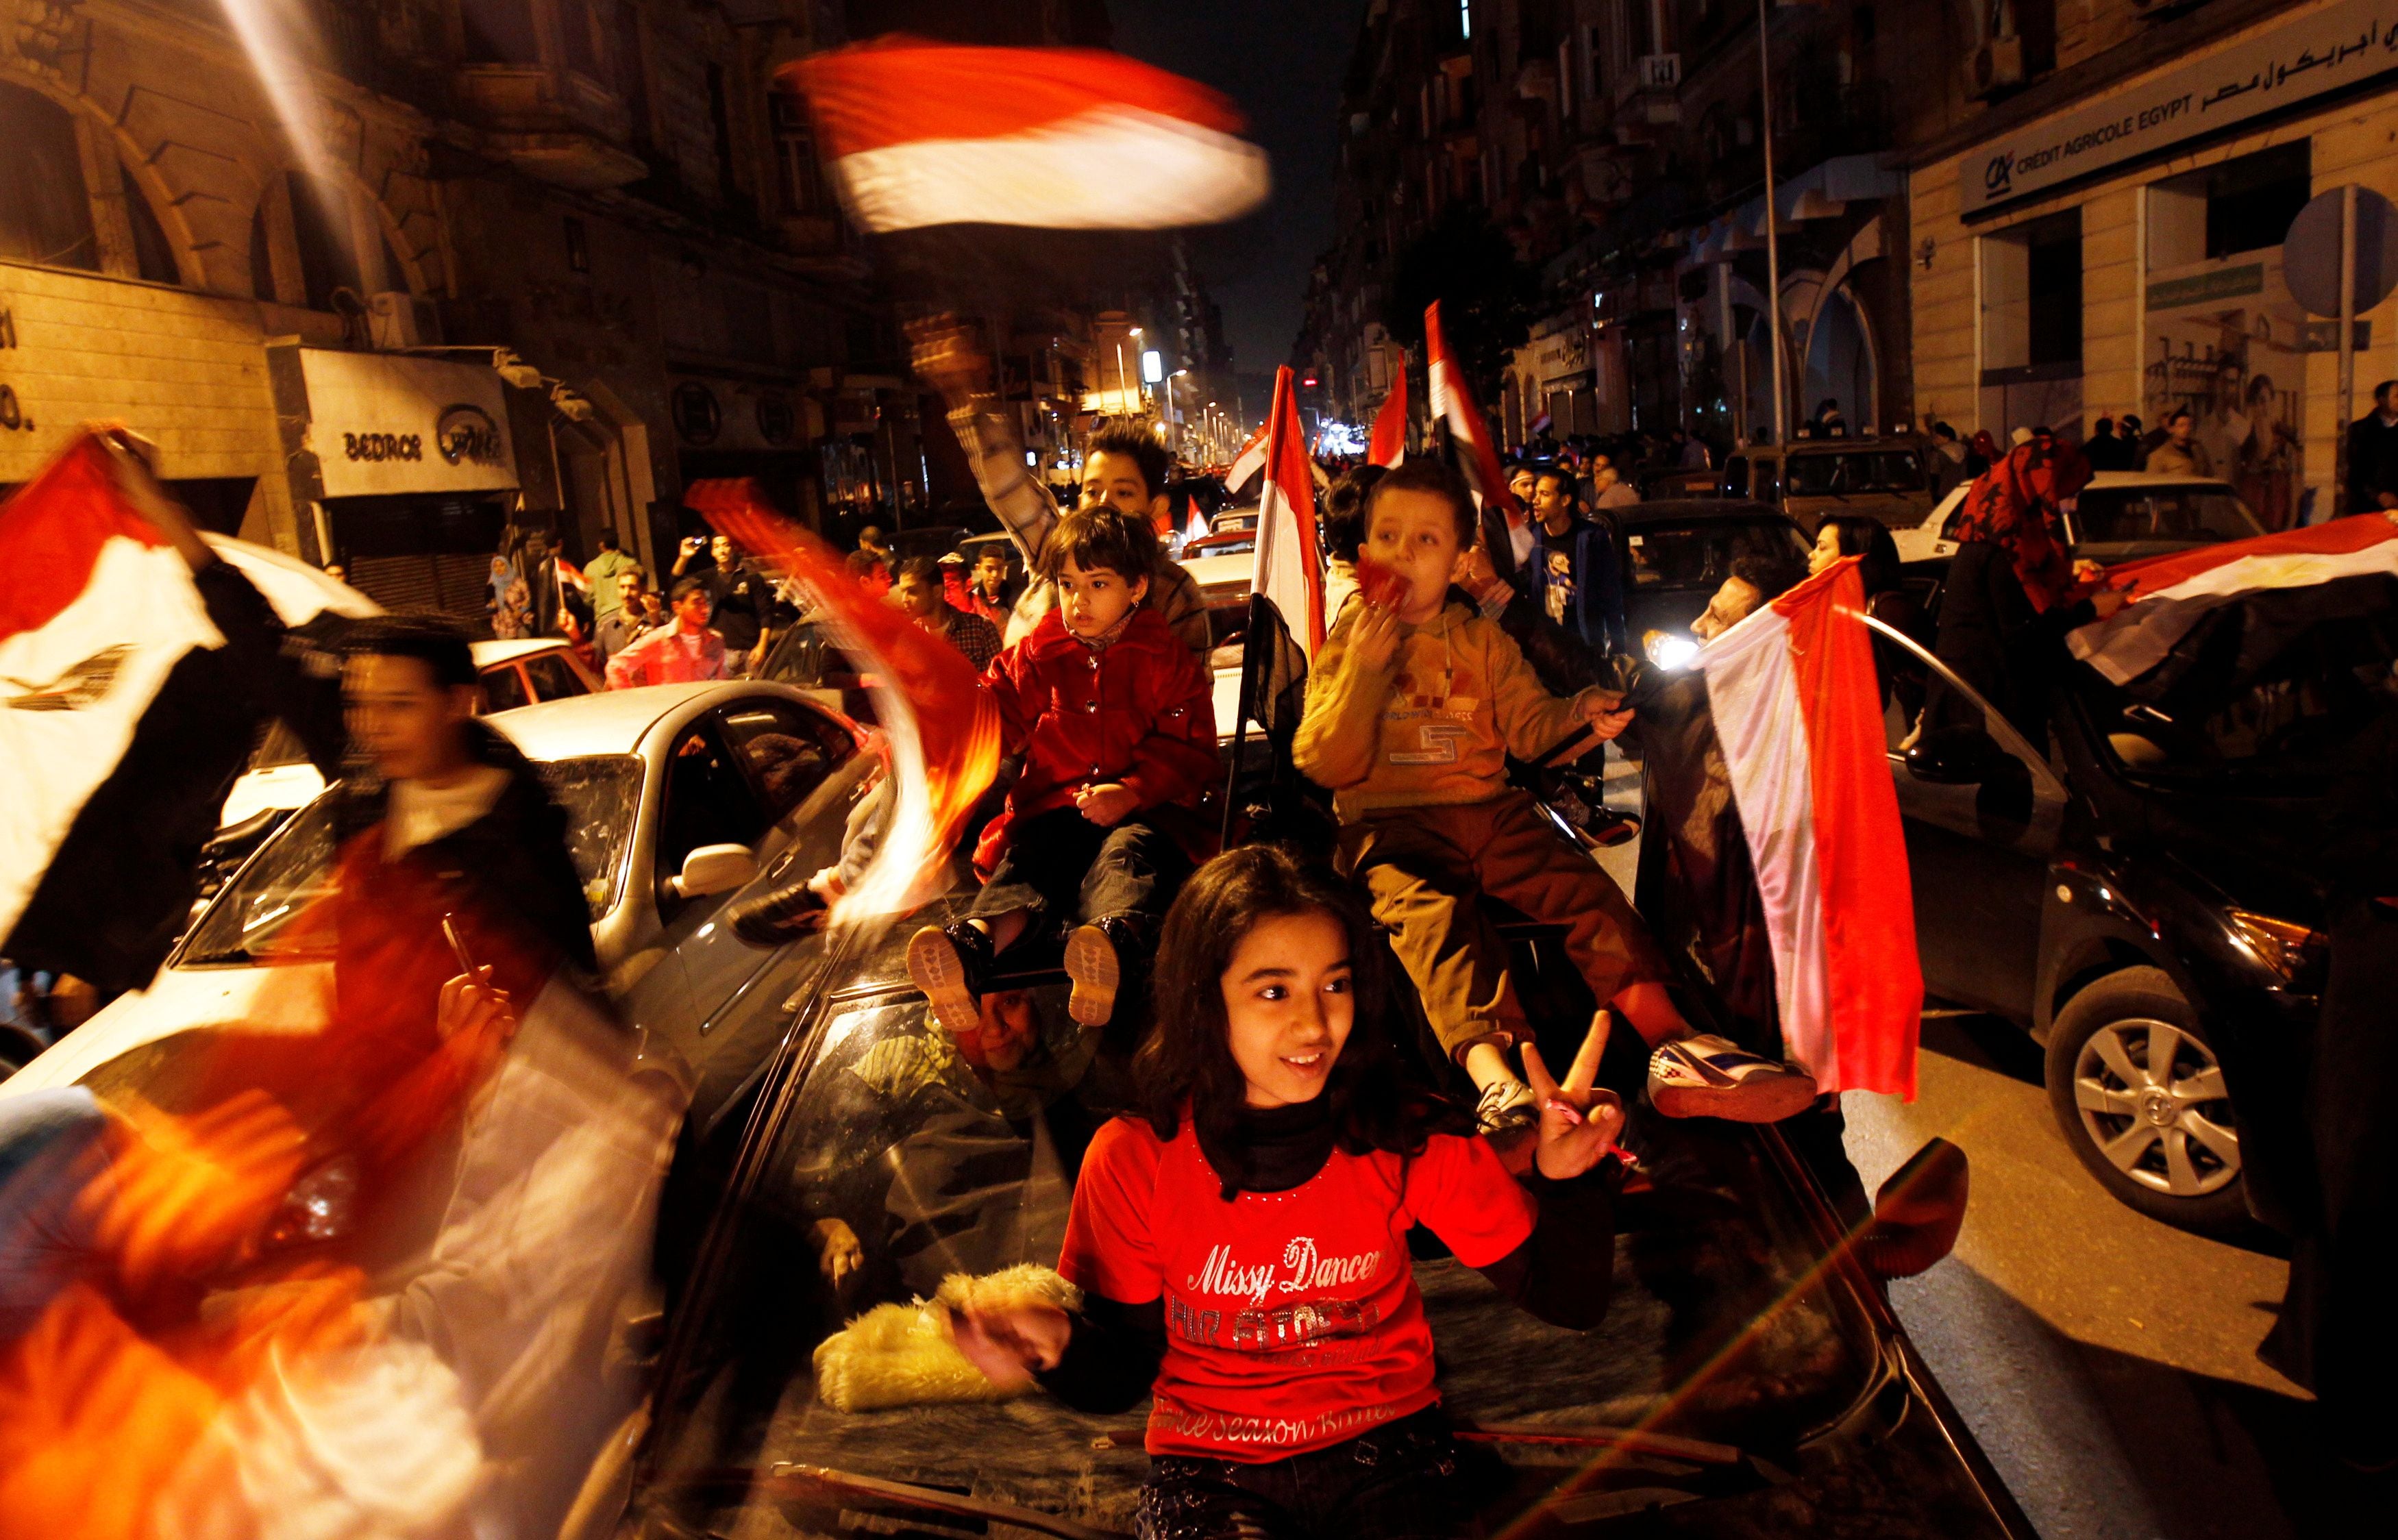 Egyptians celebrate after the announcement of President Hosni Mubarak’s resignation in February 2011